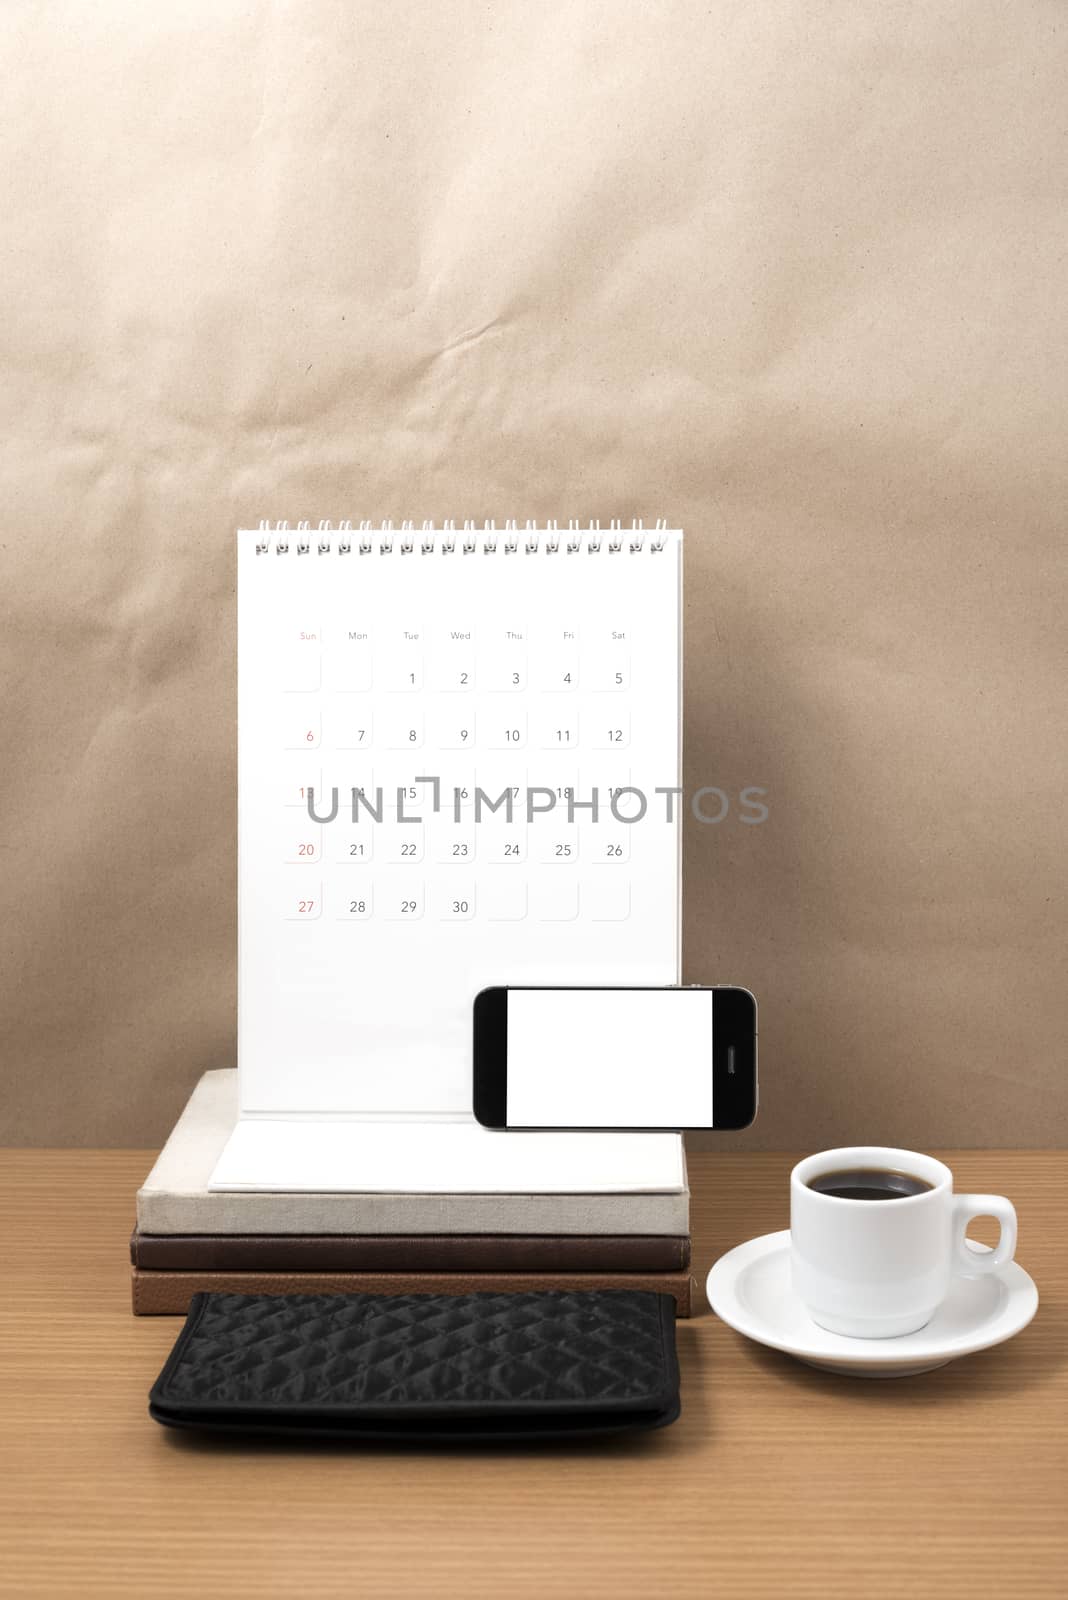 working table : coffee with phone,stack of book and wallet on wood background